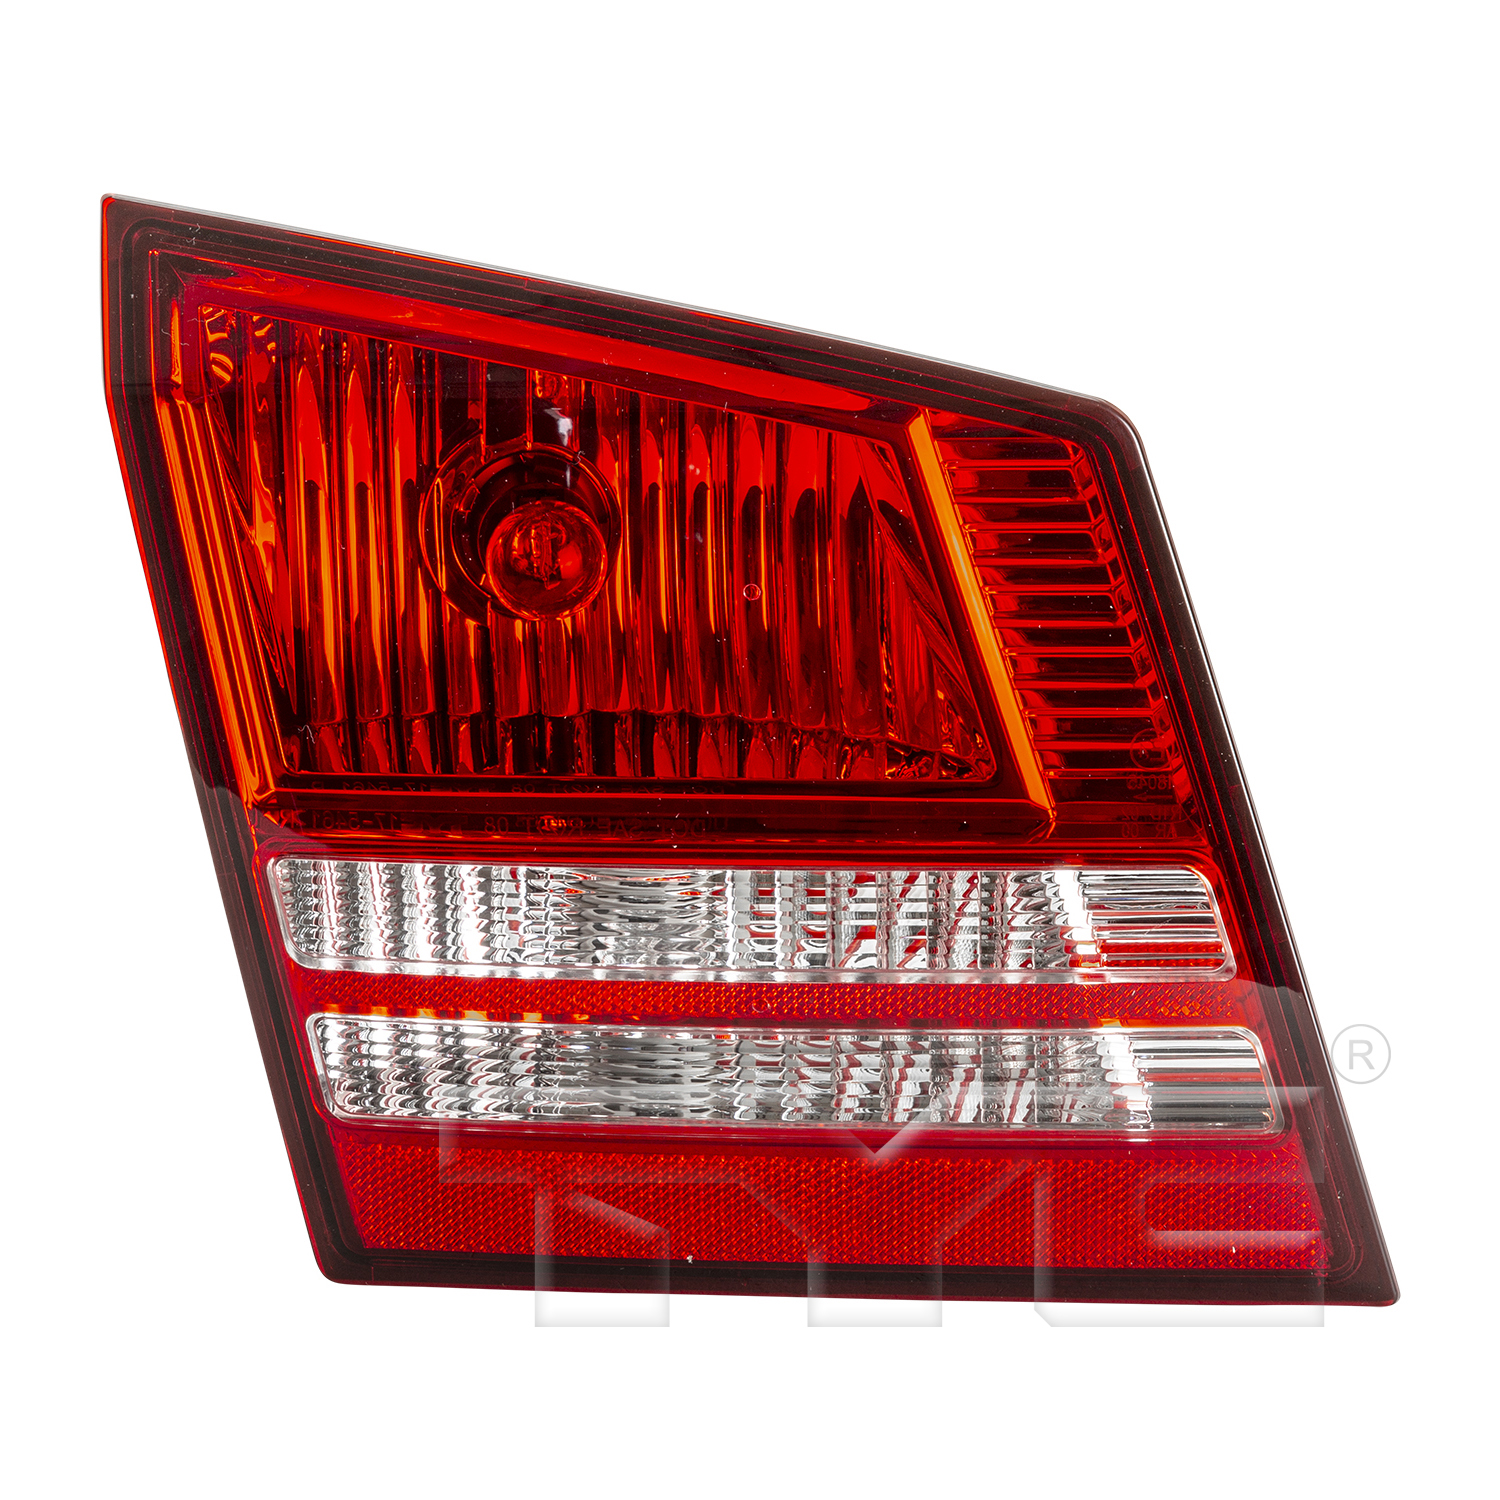 Aftermarket TAILLIGHTS for DODGE - JOURNEY, JOURNEY,09-20,LT Taillamp assy inner